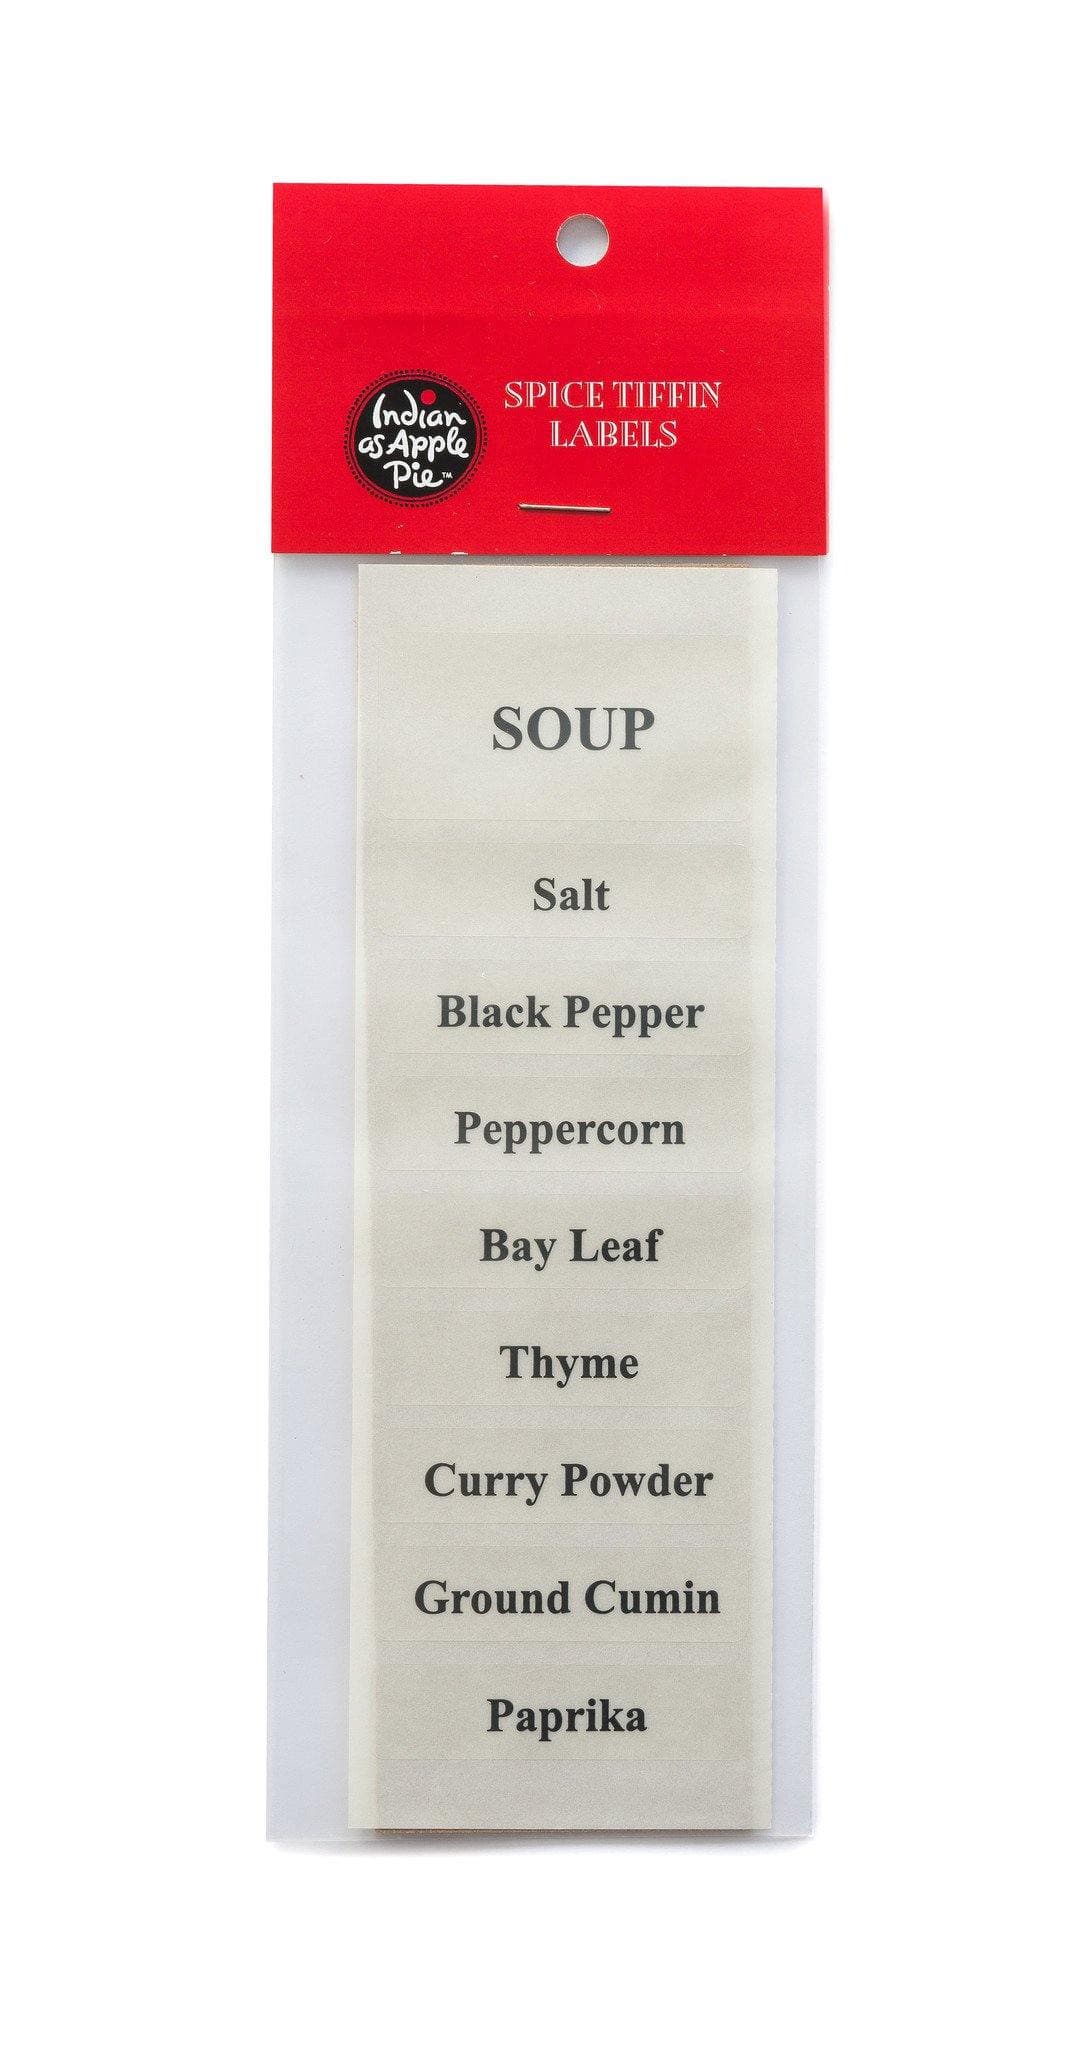 https://www.indianasapplepie.com/cdn/shop/products/iaap-spice-labels-soup-spices_1084x.jpg?v=1657983257